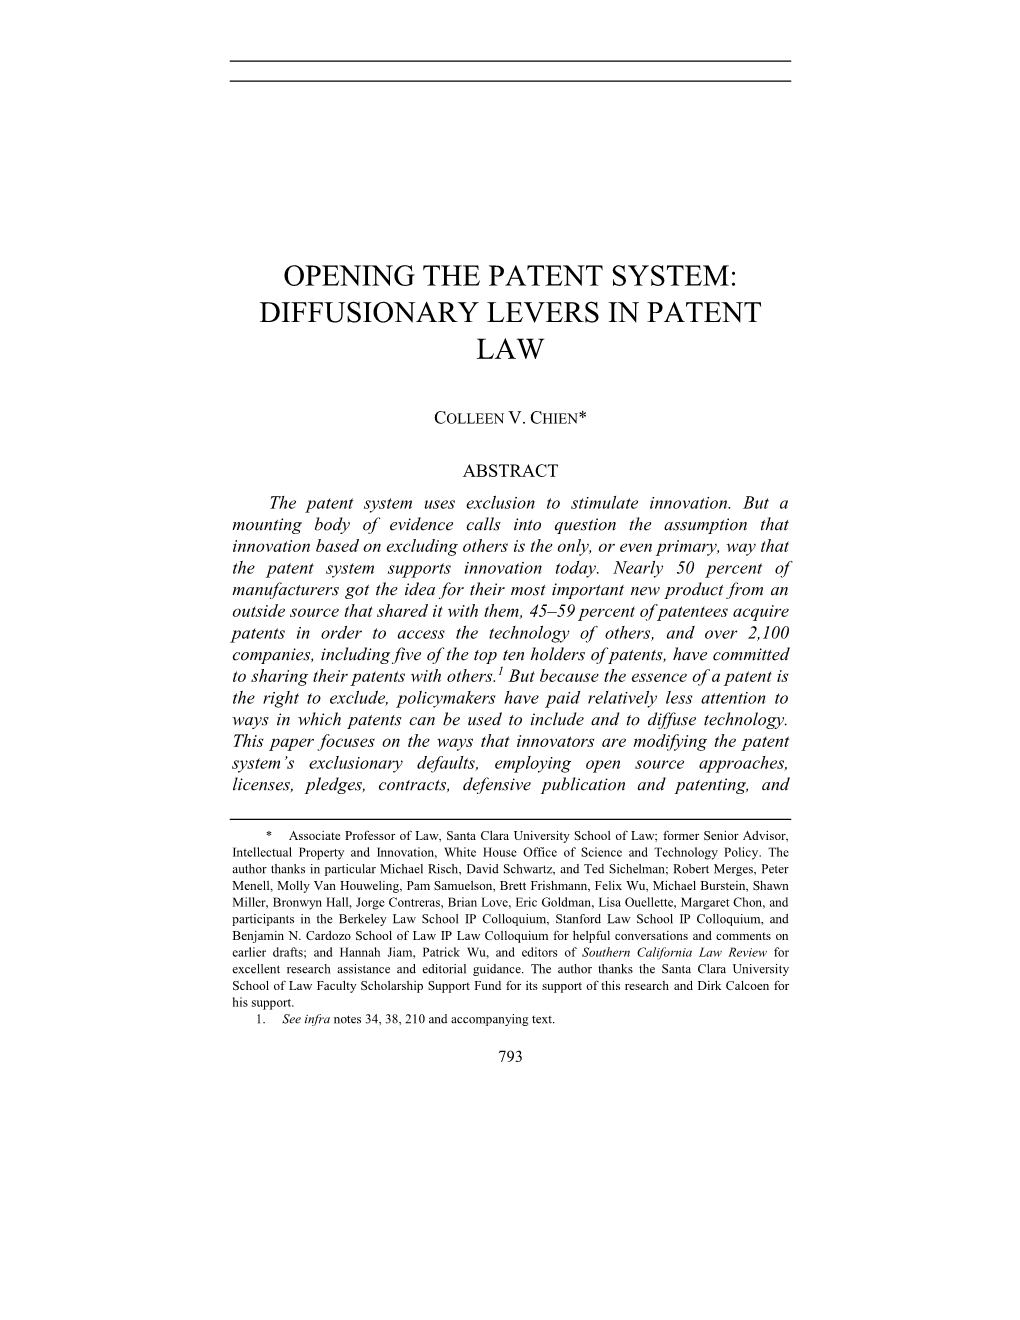 Opening the Patent System: Diffusionary Levers in Patent Law